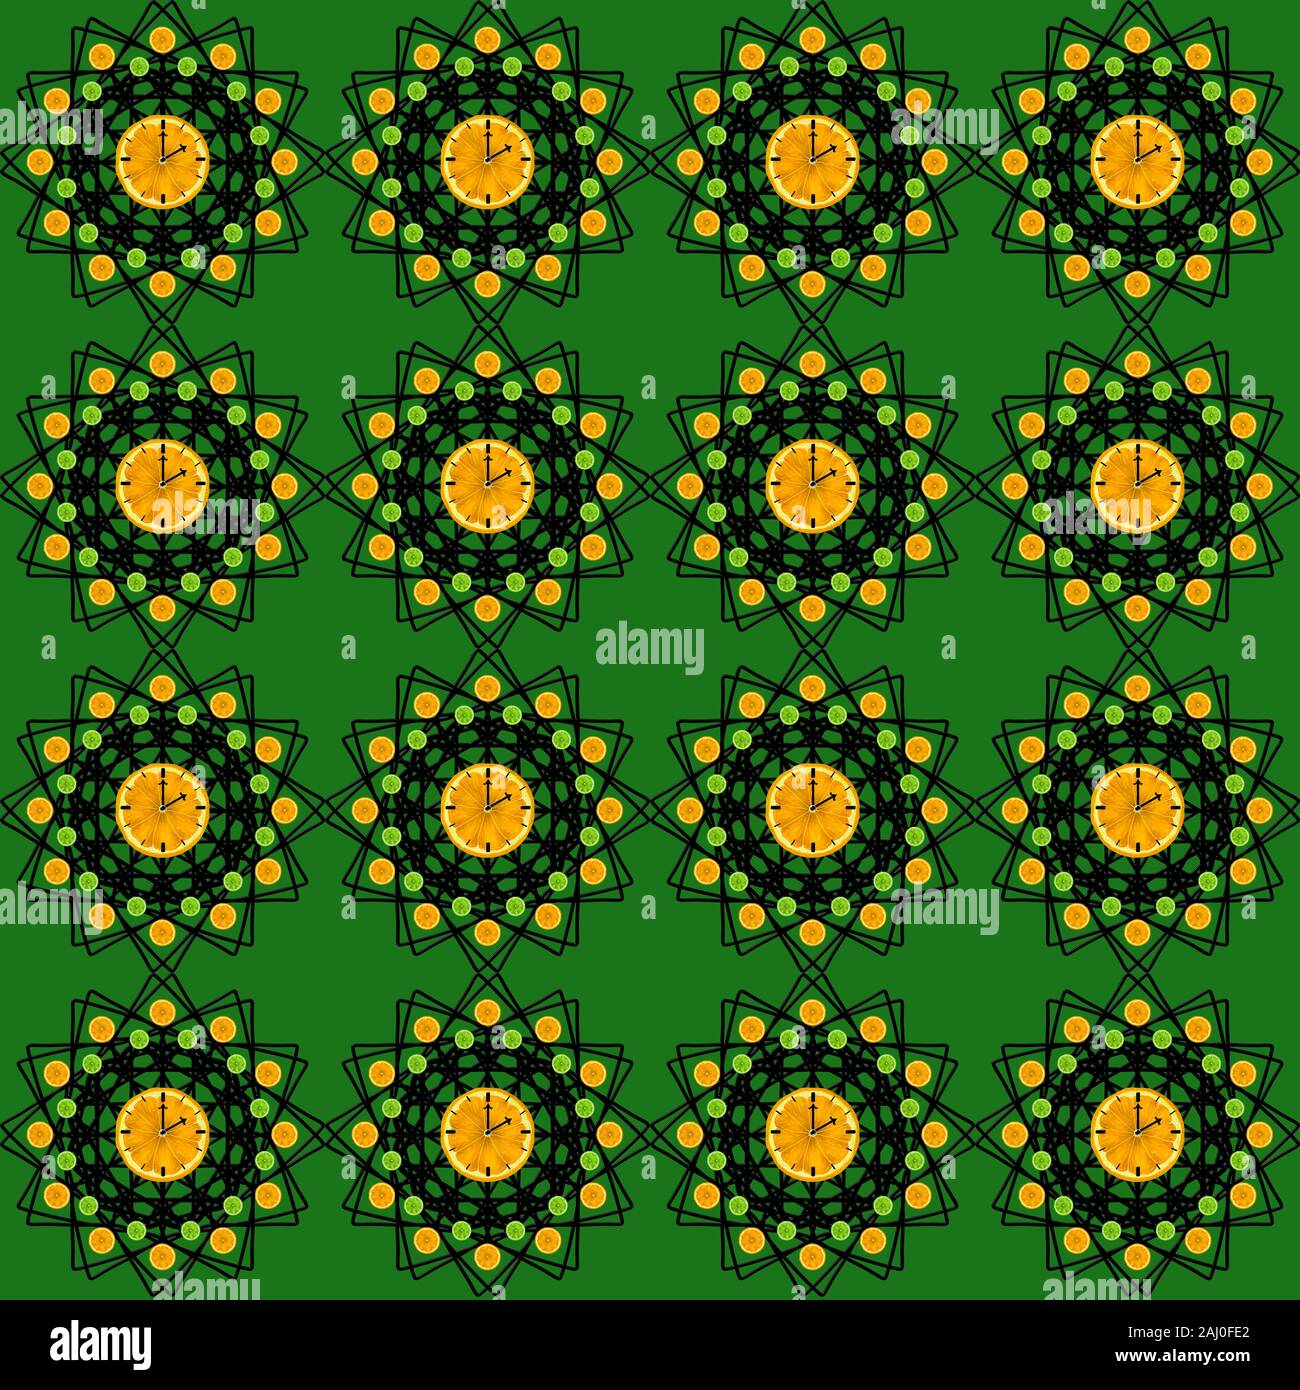 Seamless pattern with citrus clock on a green background. Stock Photo